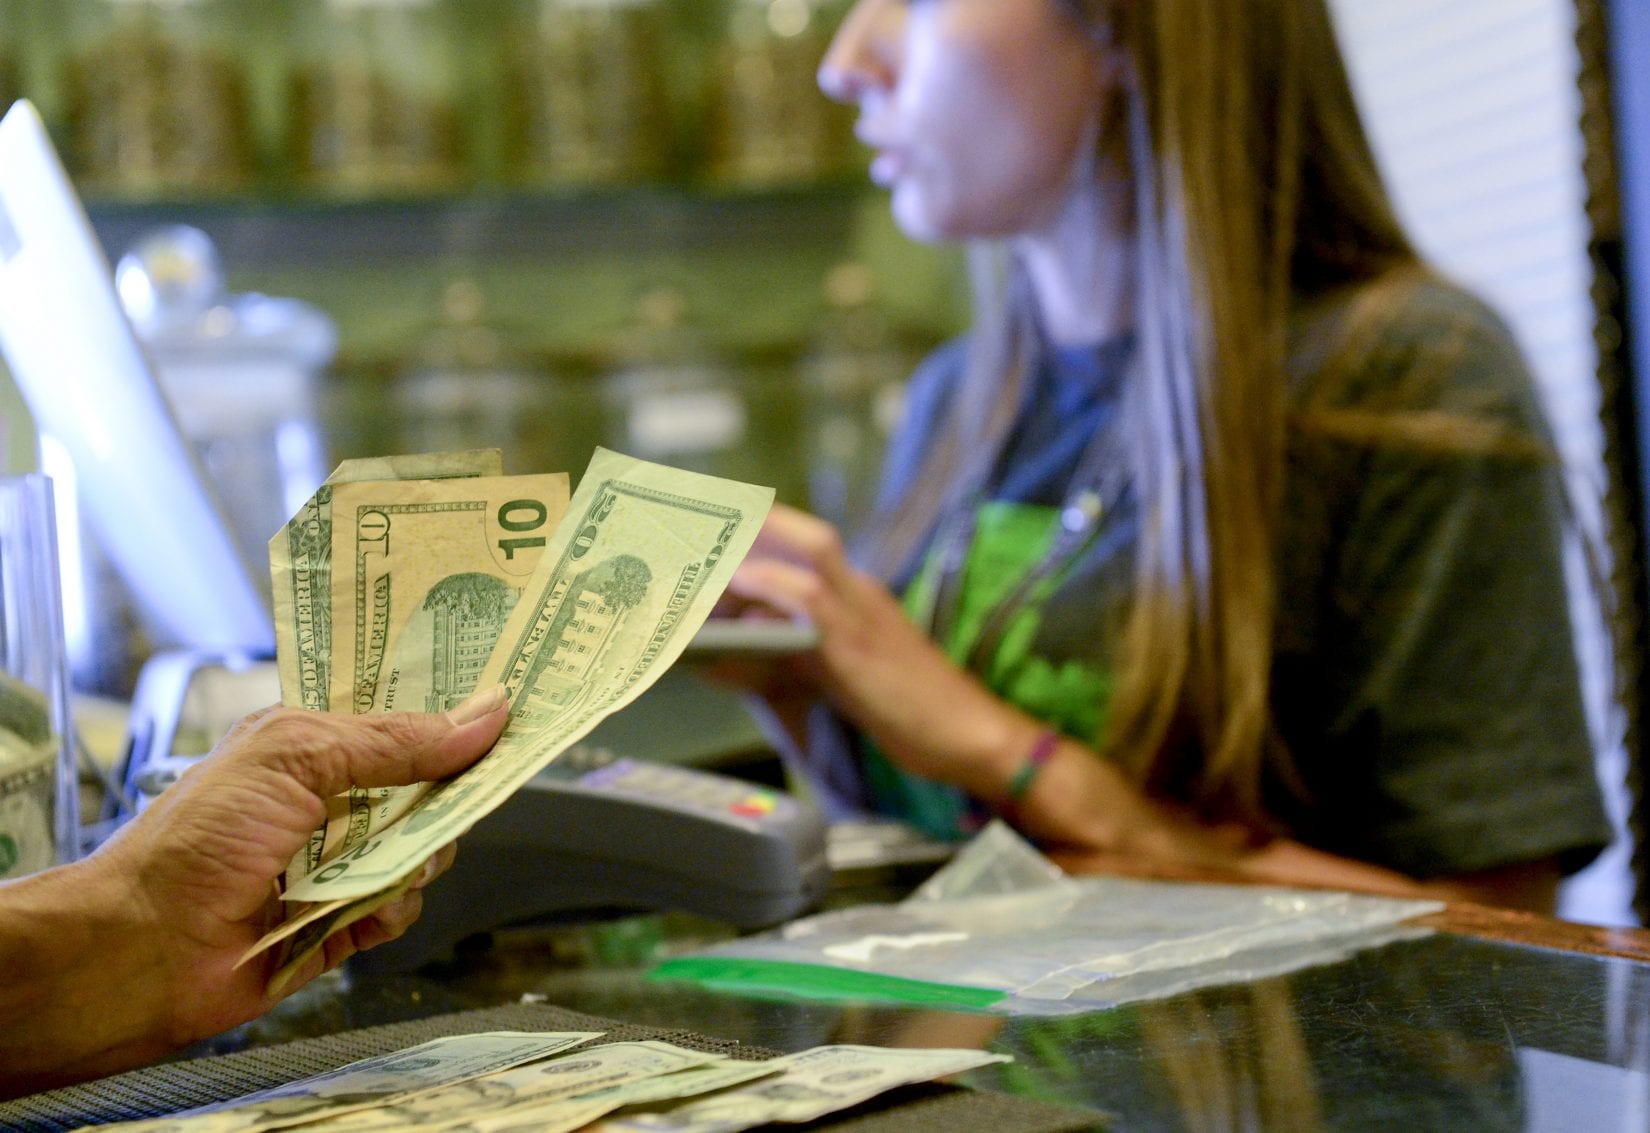 Colorado looks to marijuana tax as budget fix, stretching the limits of what voters approved